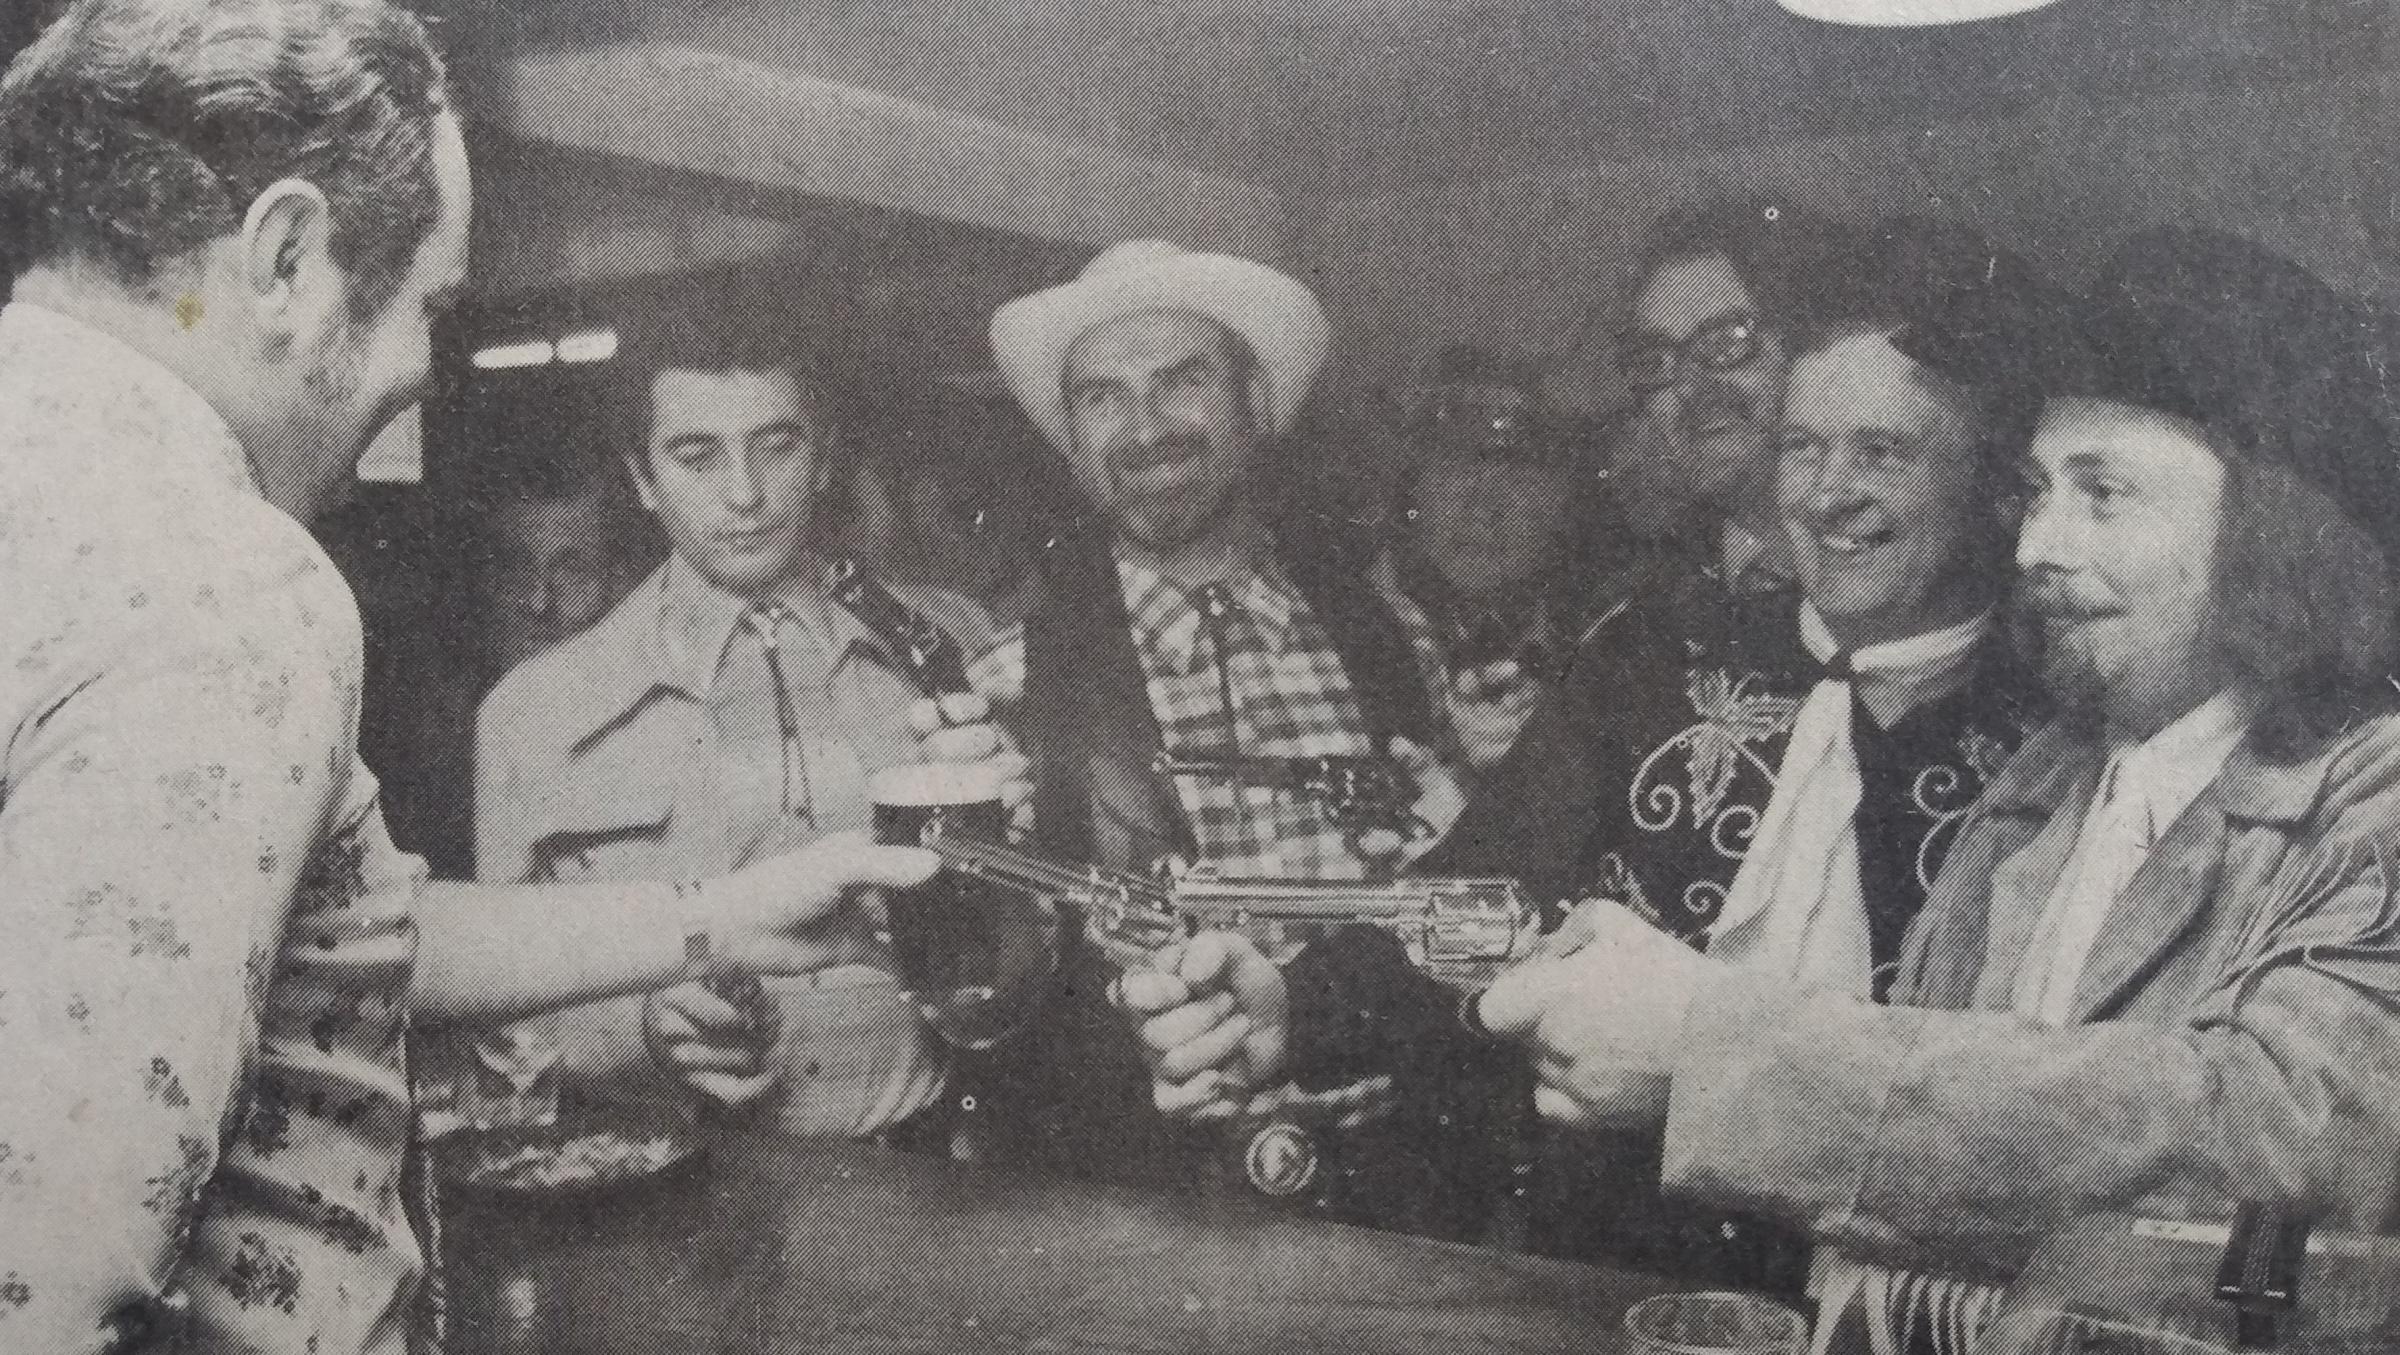 Barman Tony Hill is held up by gun-toting regulars who were members of Diamond Lils Country and Western Club at the Goodrest Inn. The picture was taken in December 1976